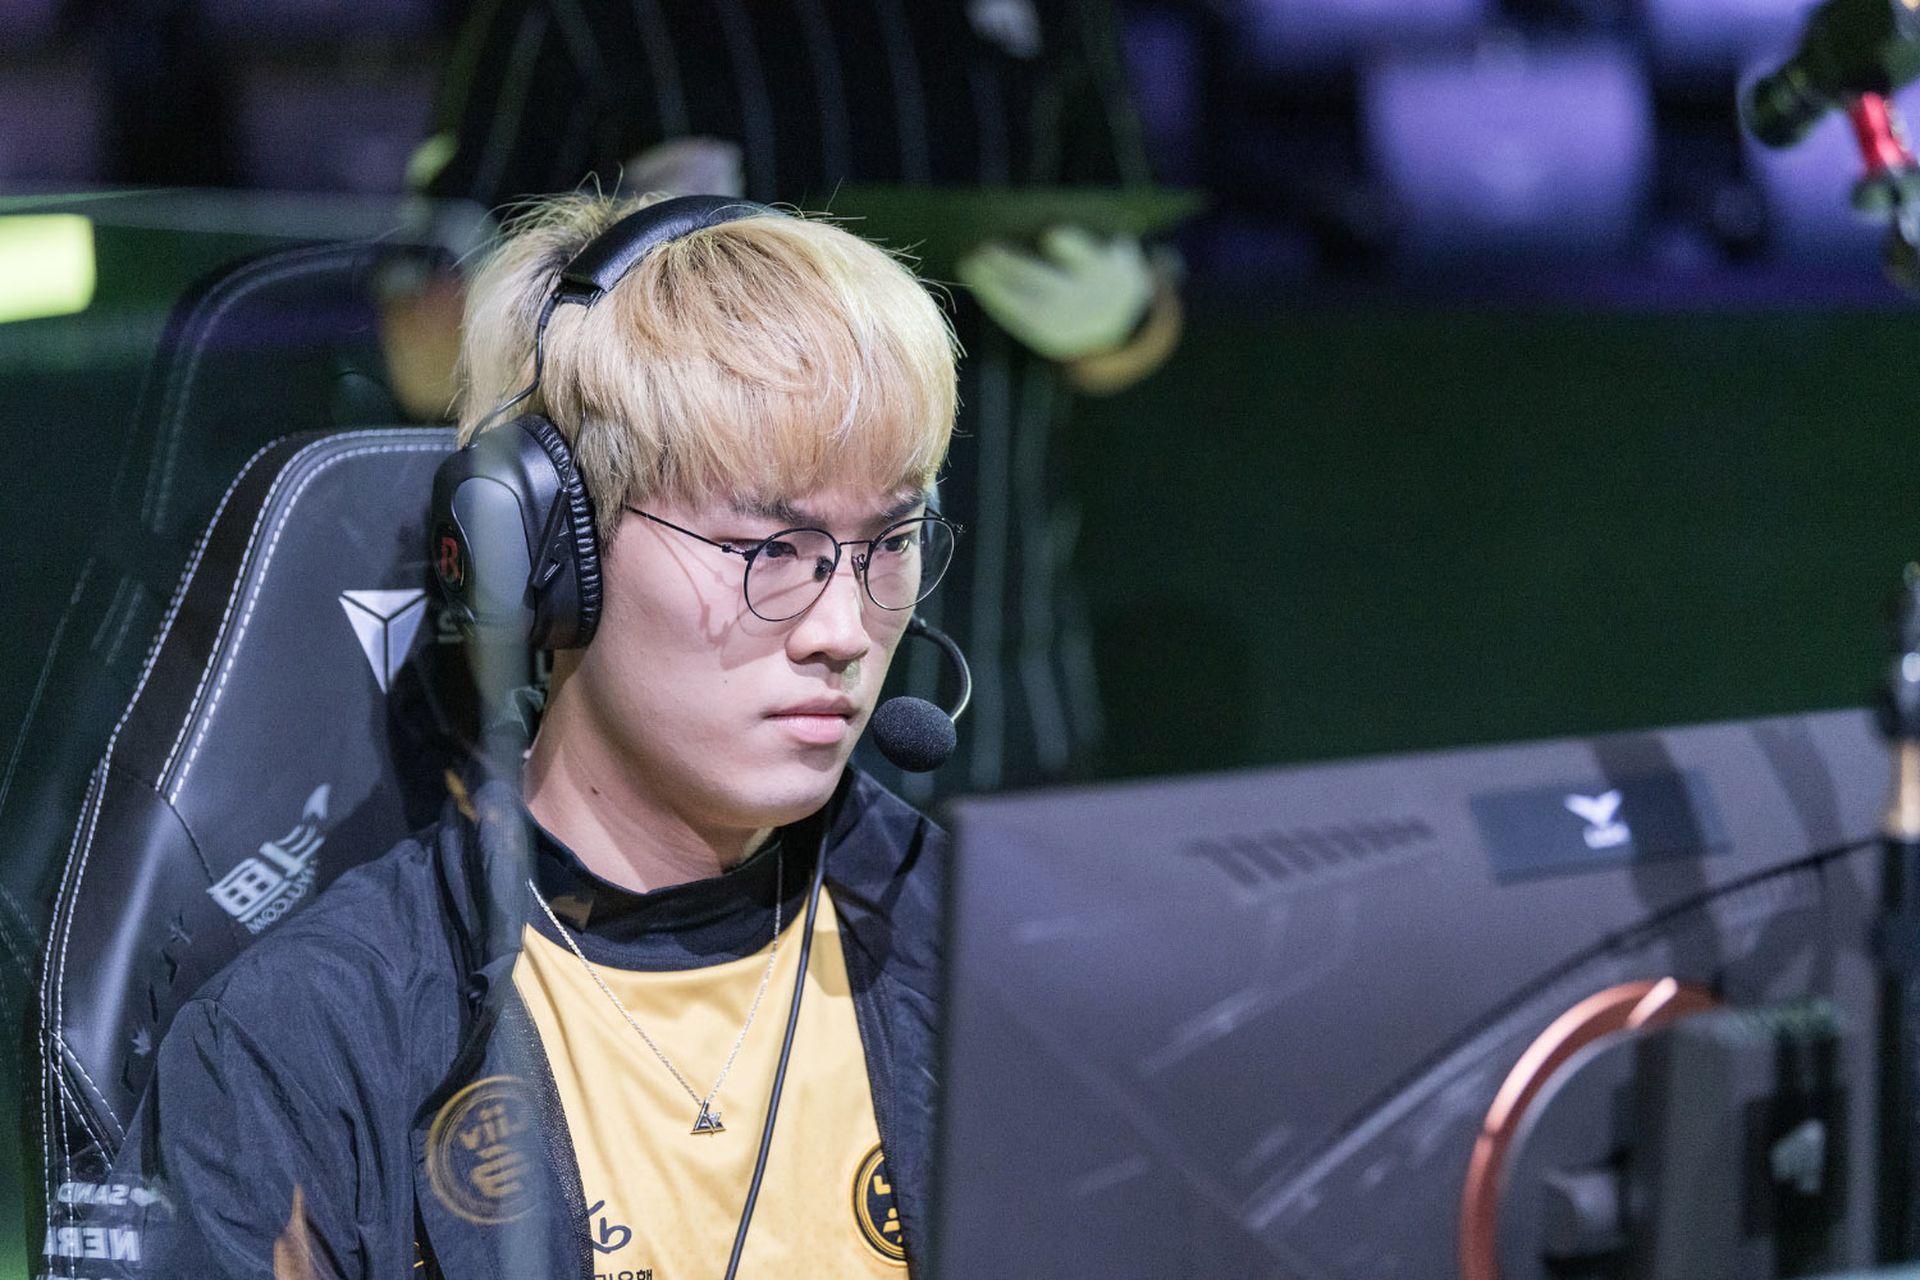 LoL player Prince joined FlyQuest: Who is he?